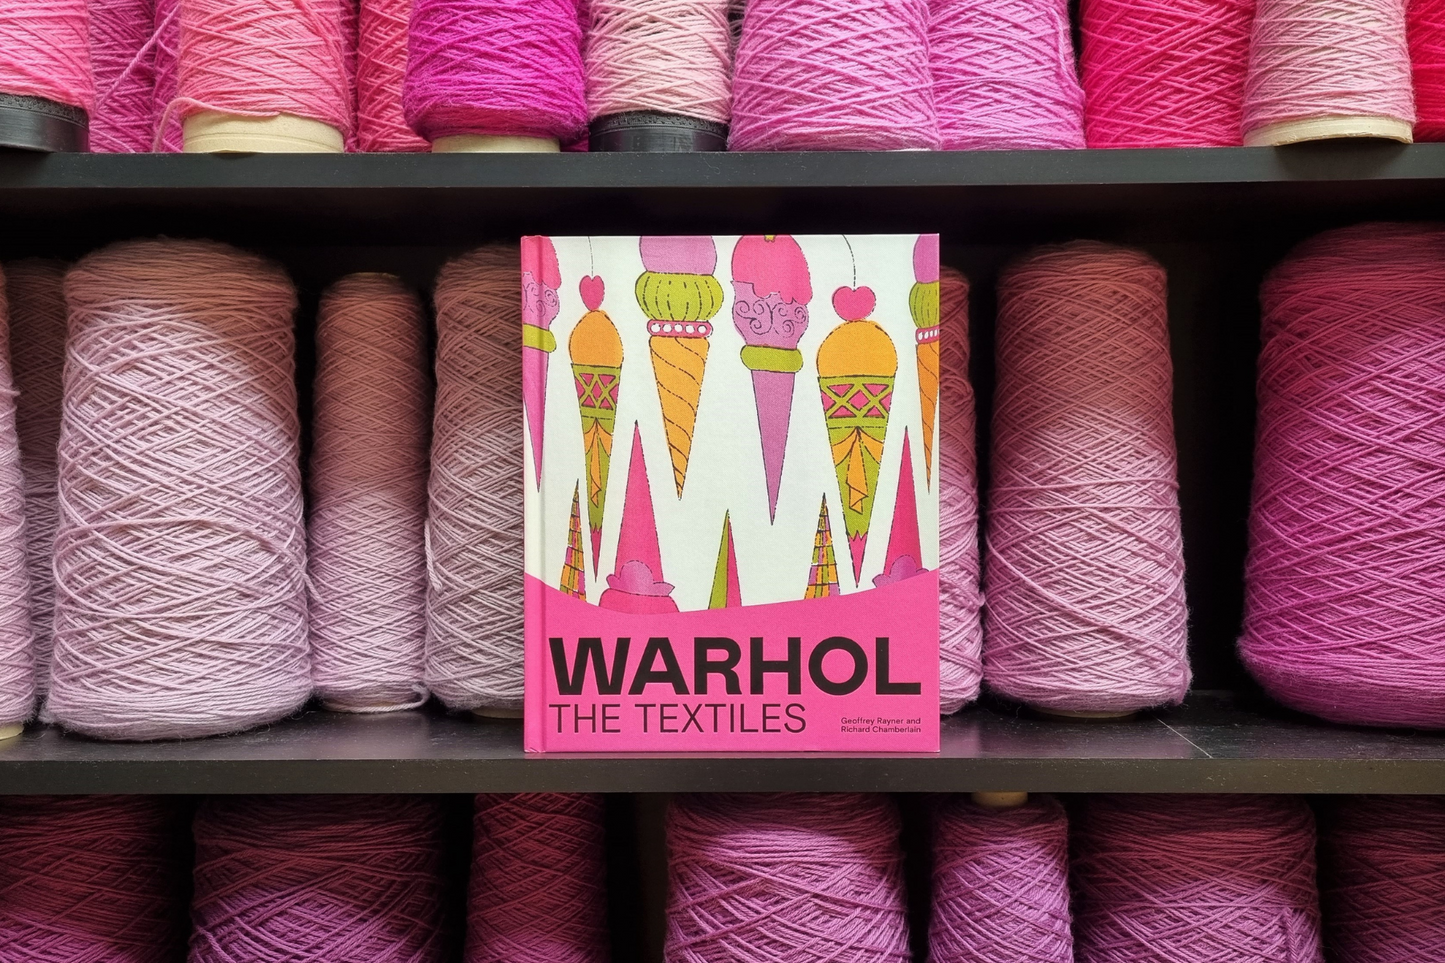 Andy Warhol: The Textiles - Making the Exhibition